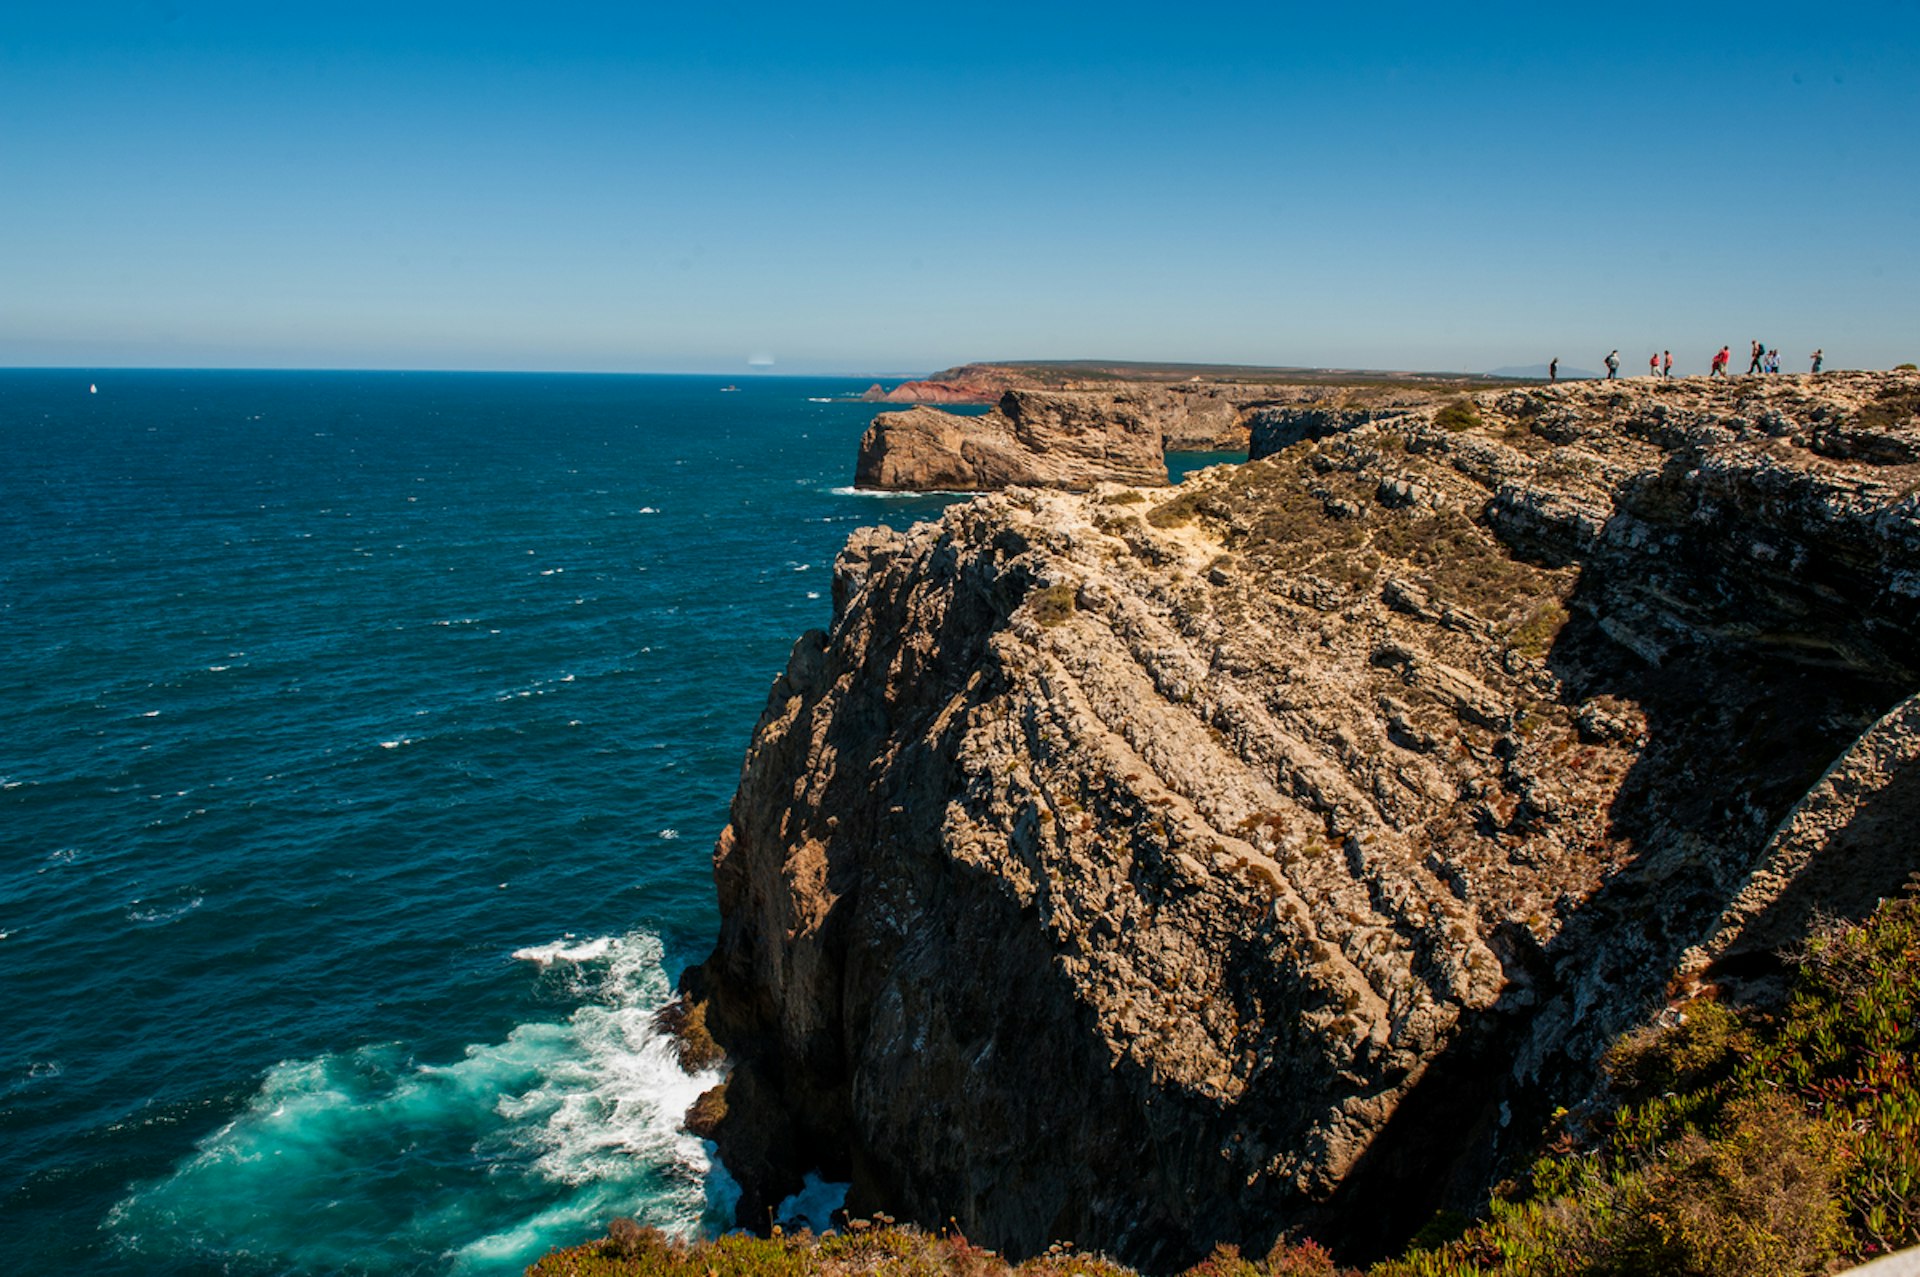 Cape St. Vincent. Image by Lola Akinmade Åkerström / Lonely Planet